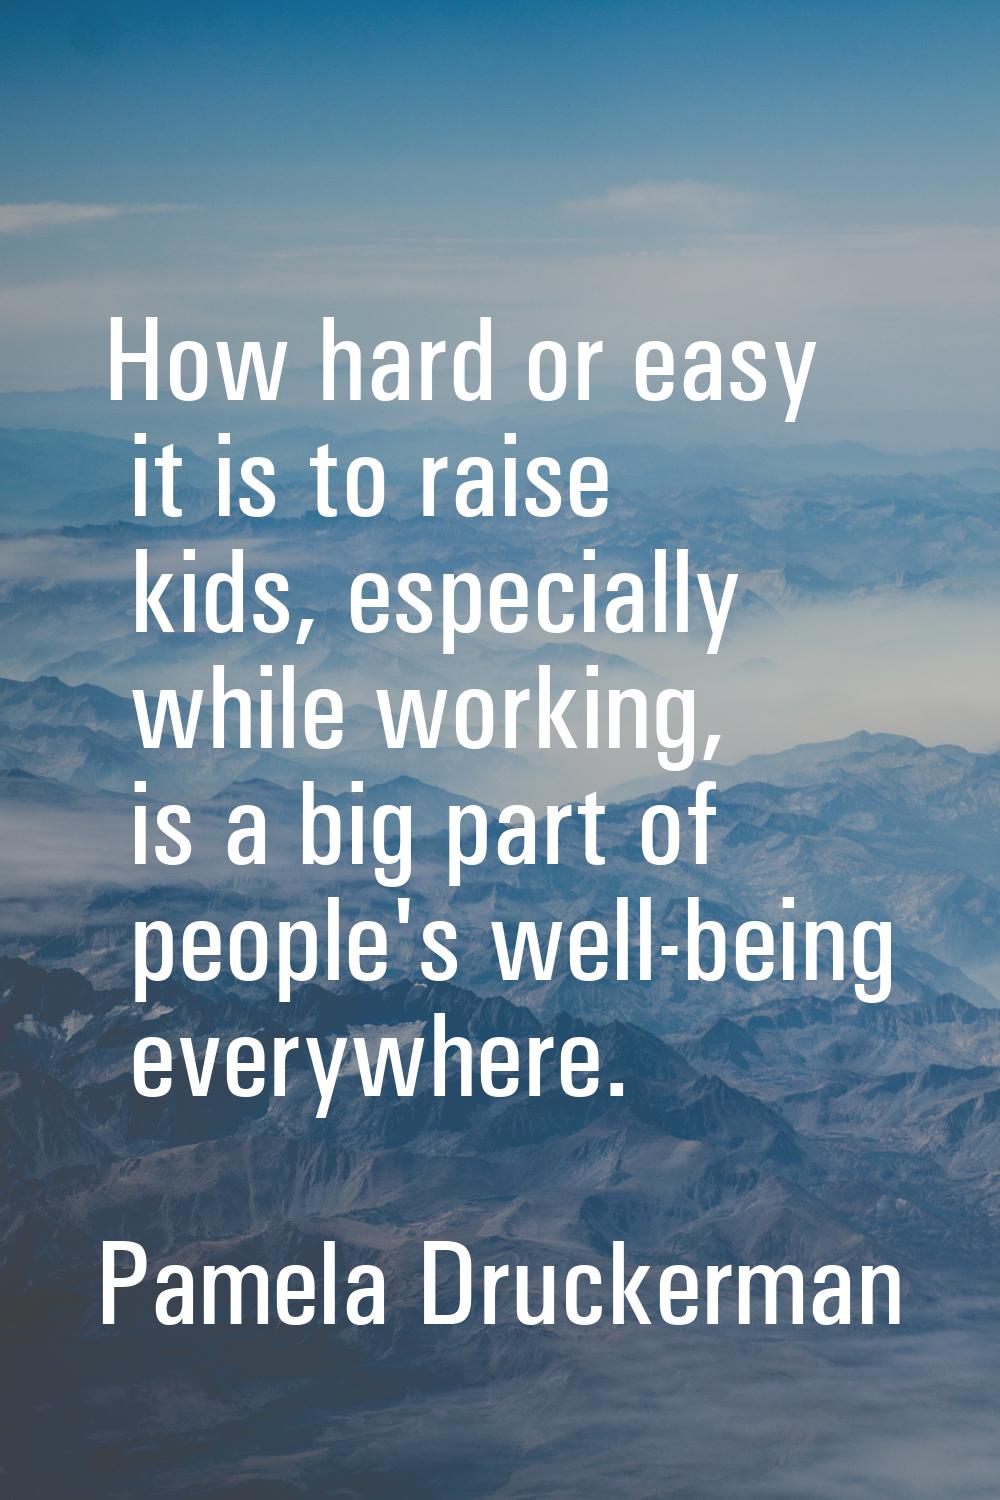 How hard or easy it is to raise kids, especially while working, is a big part of people's well-bein